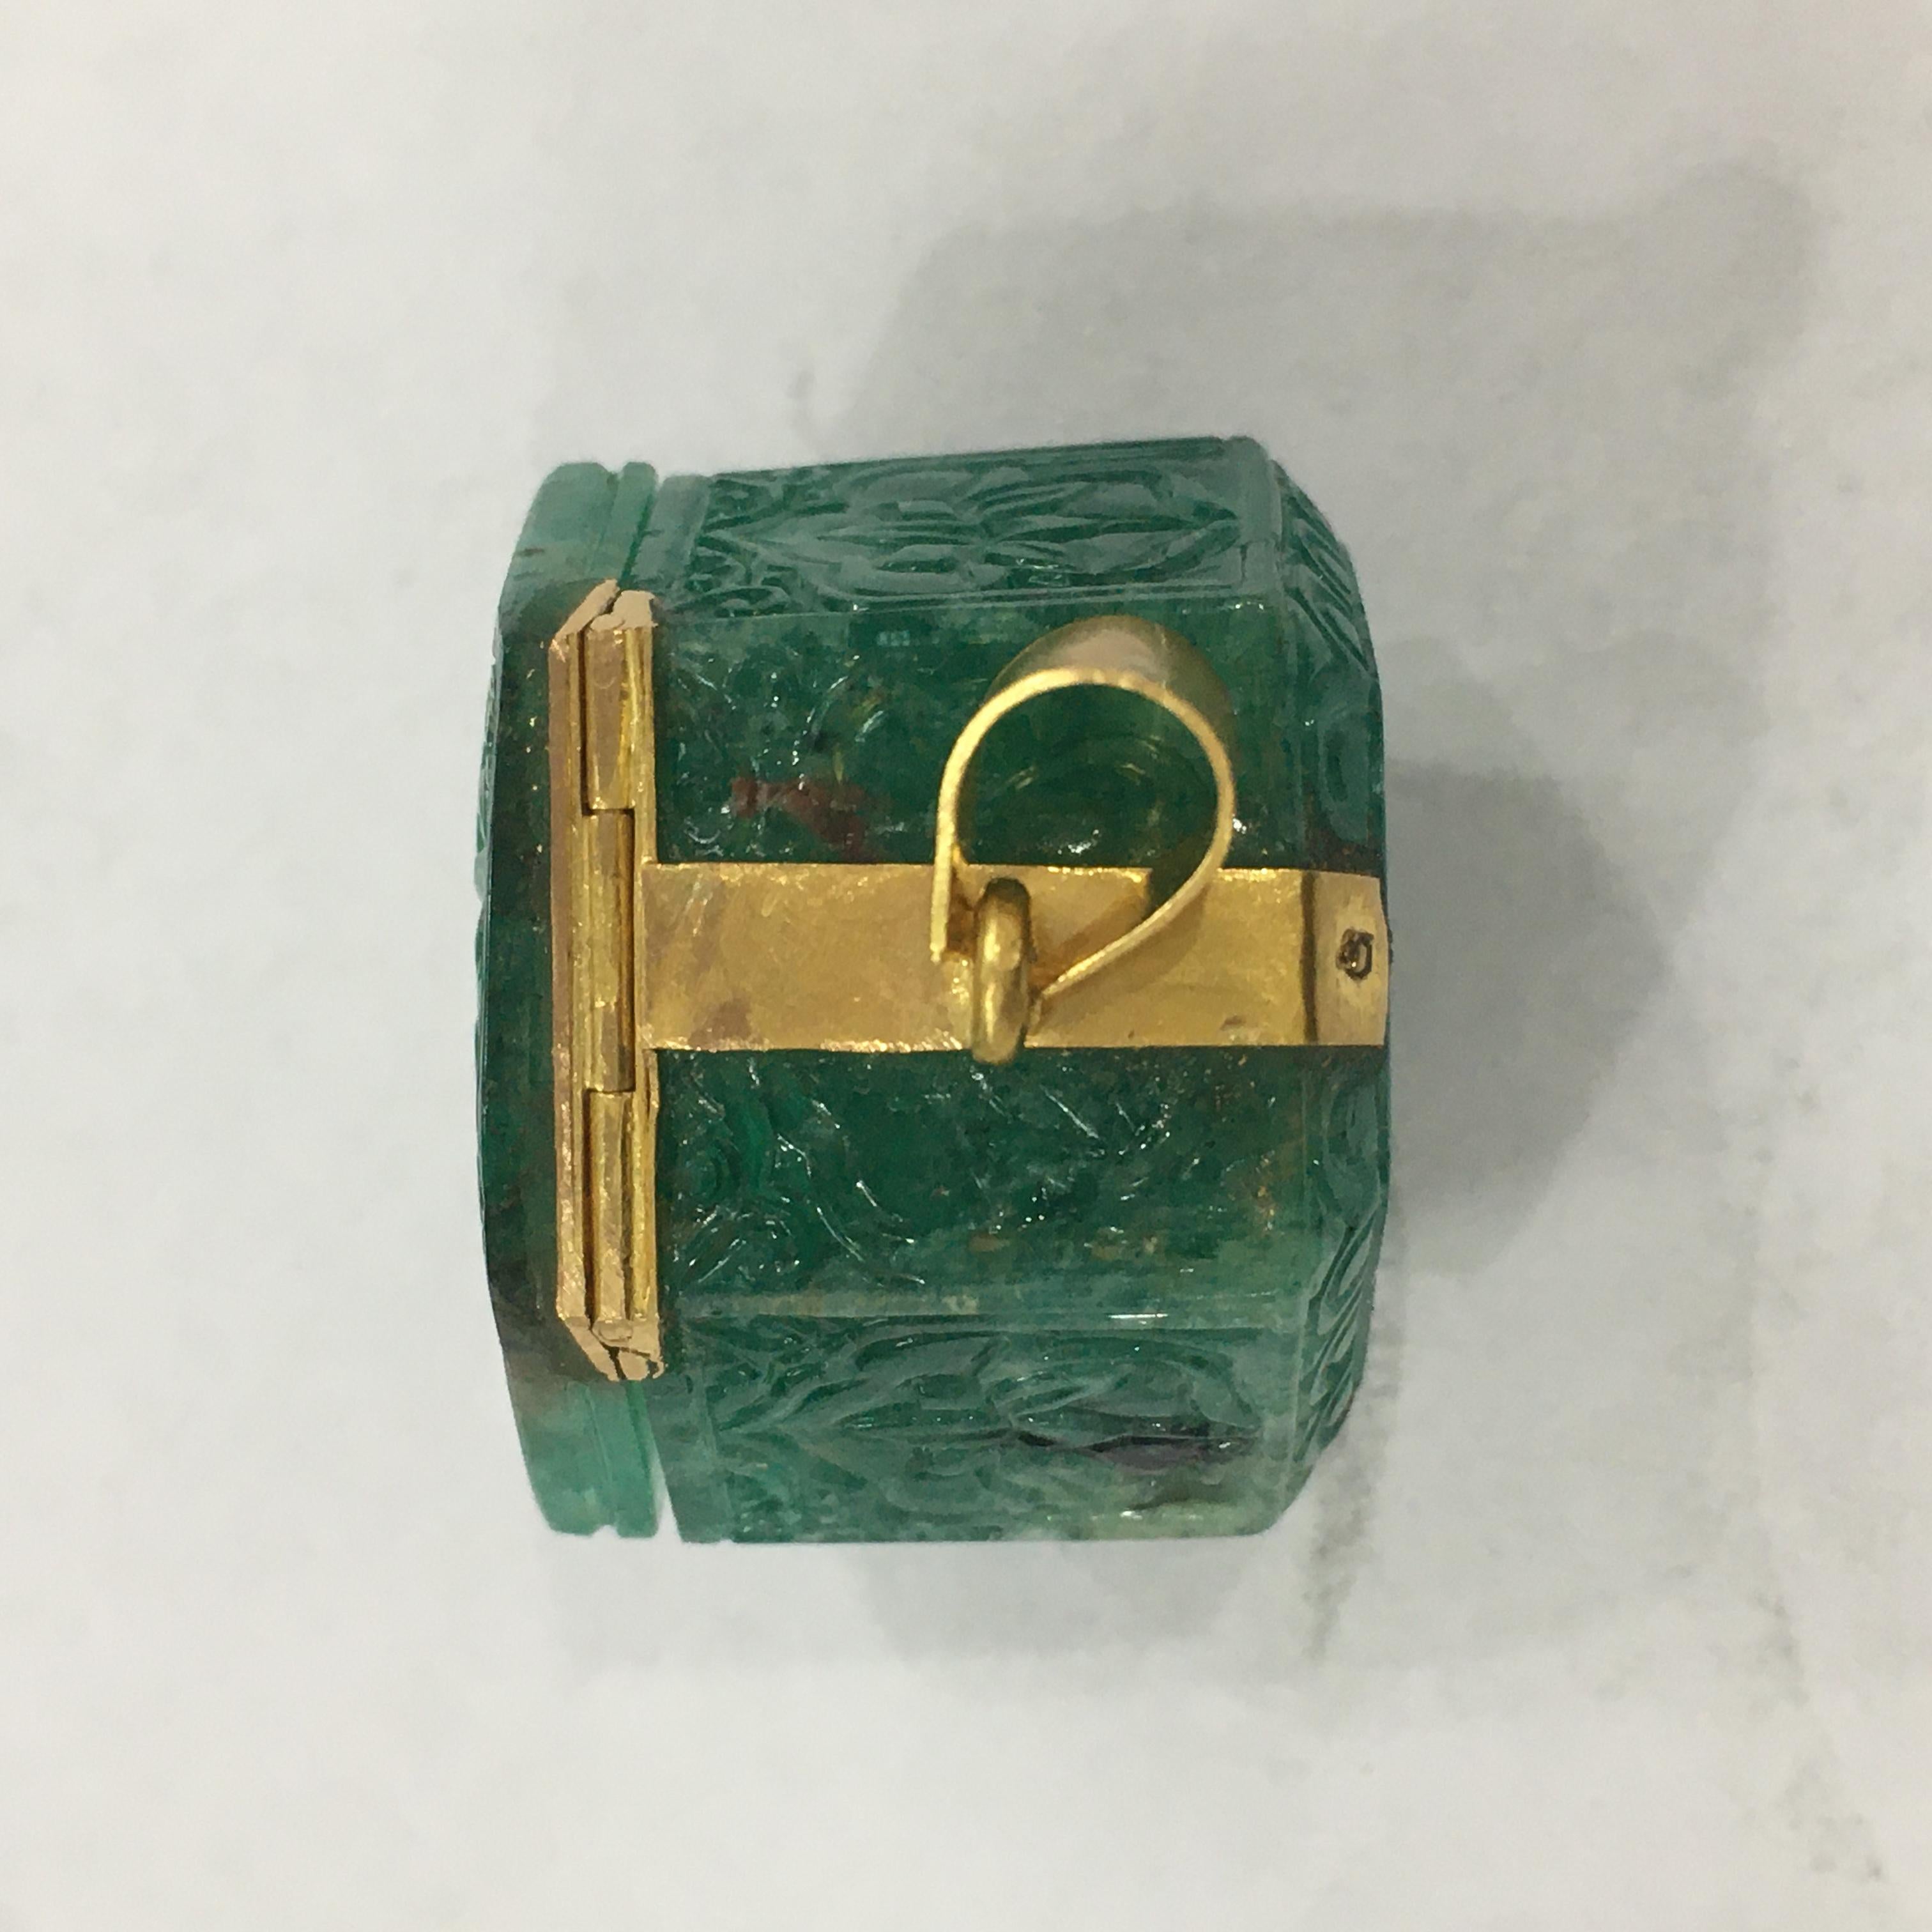 A hexagonal emerald box, made from single piece of 165 ct Zambian emerald setted with 22K yellow gold.

The emerald box of a rich deep green colour and good quality is hand carved on all the sides with floral and poppy motifs. The gold setting is in